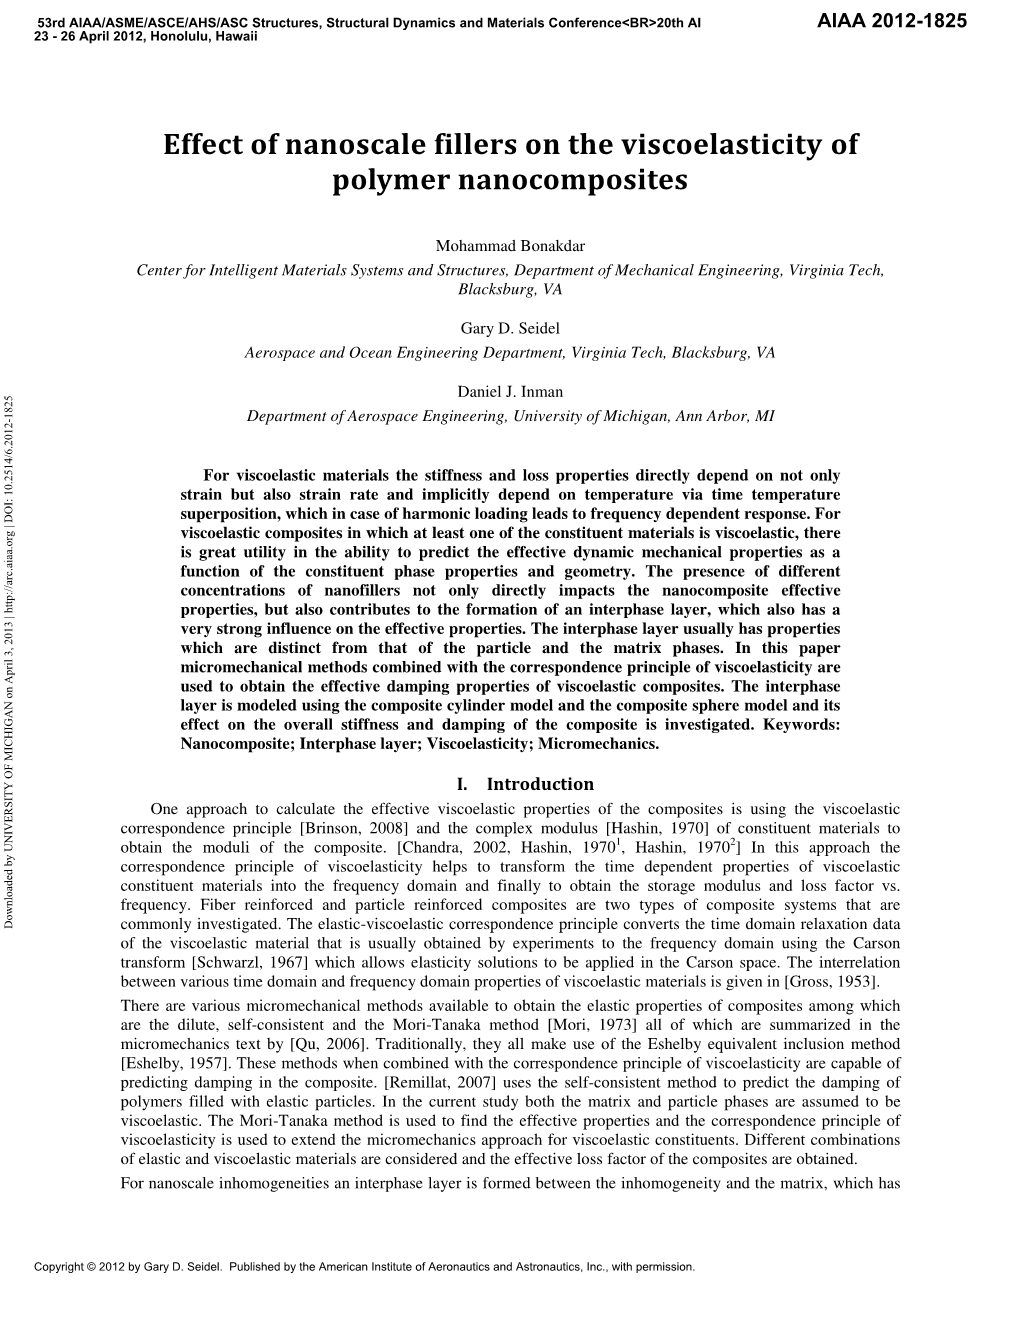 Effect of Nanoscale Fillers on the Viscoelasticity of Polymer Nanocomposites